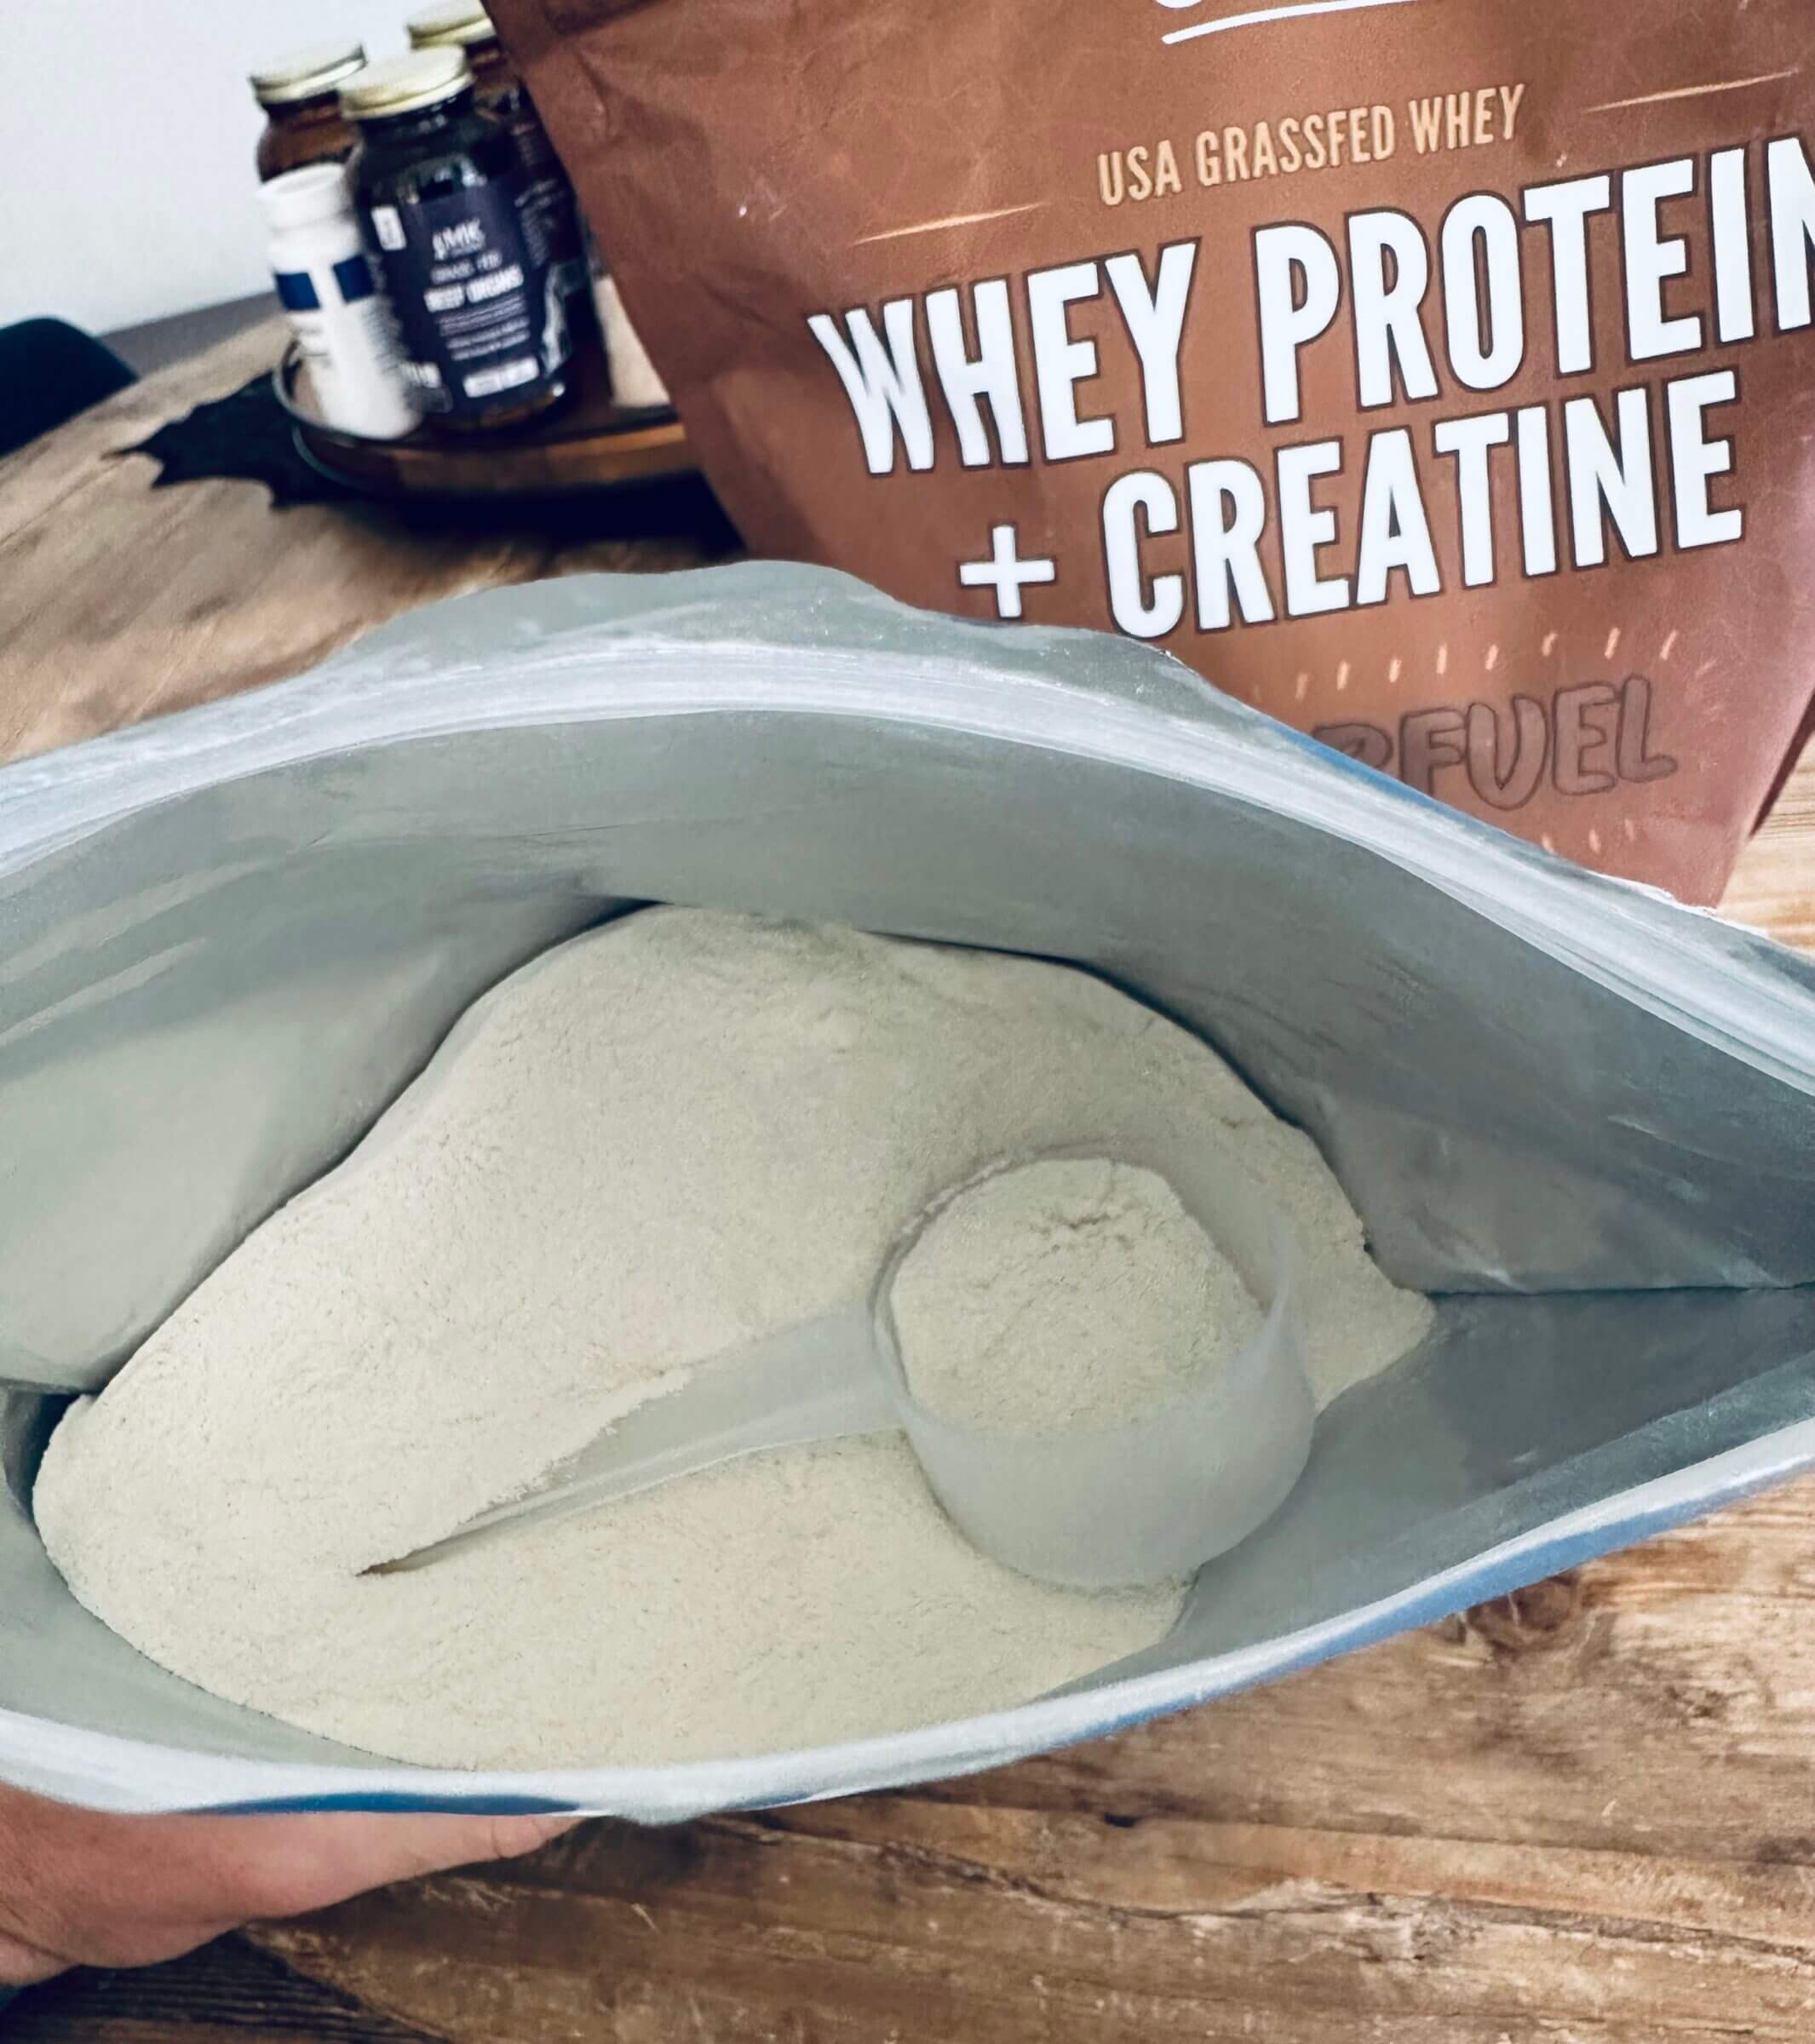 One scoop delivers 17 grams of pure Whey protein isolate.